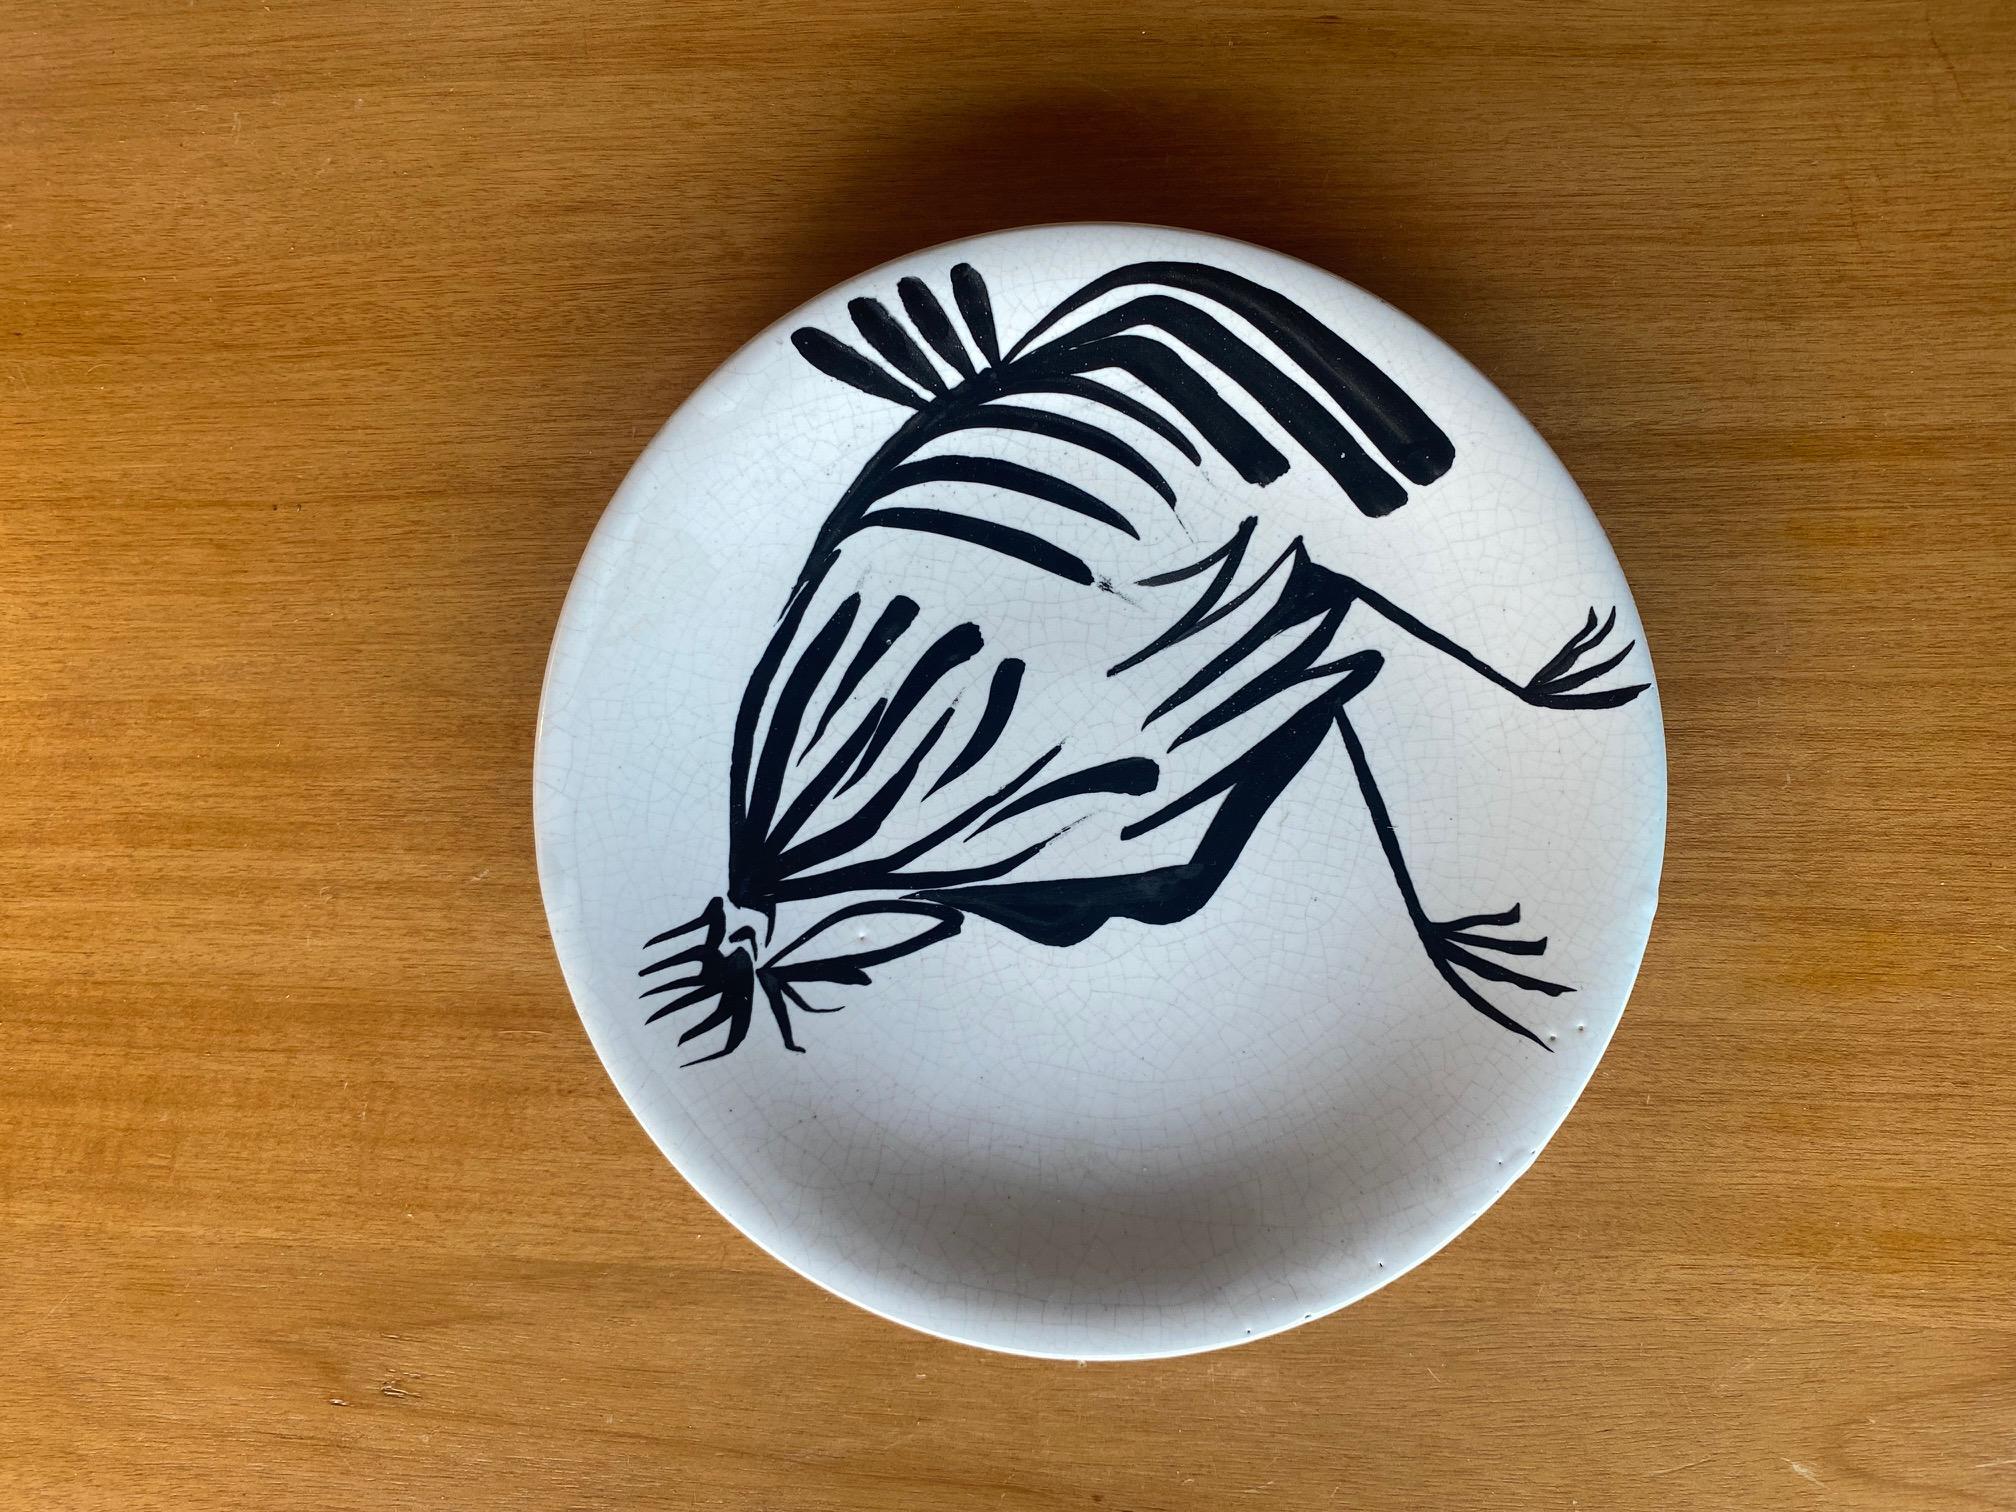 Ceramic Plate by Roger Capron, Vallauris, France, 1950s.